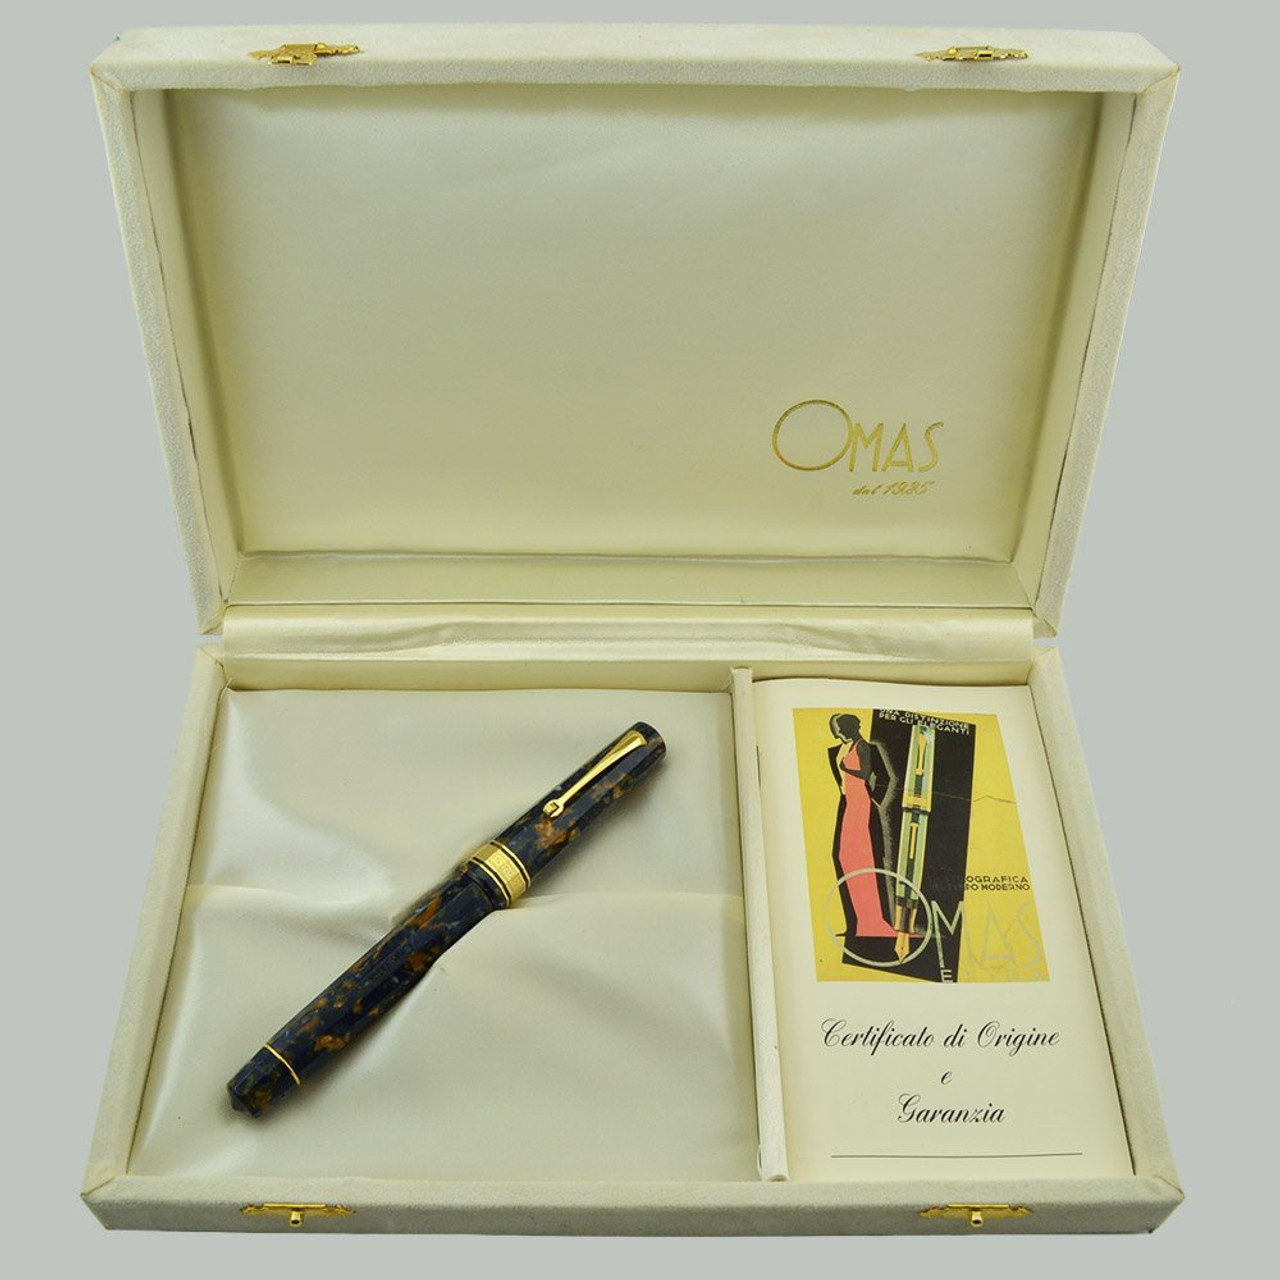 Omas Paragon Celluloid Fountain Pen (1994) - Blue Royale Marble, Fine 18k Nib  (Excellent +, Works Well)